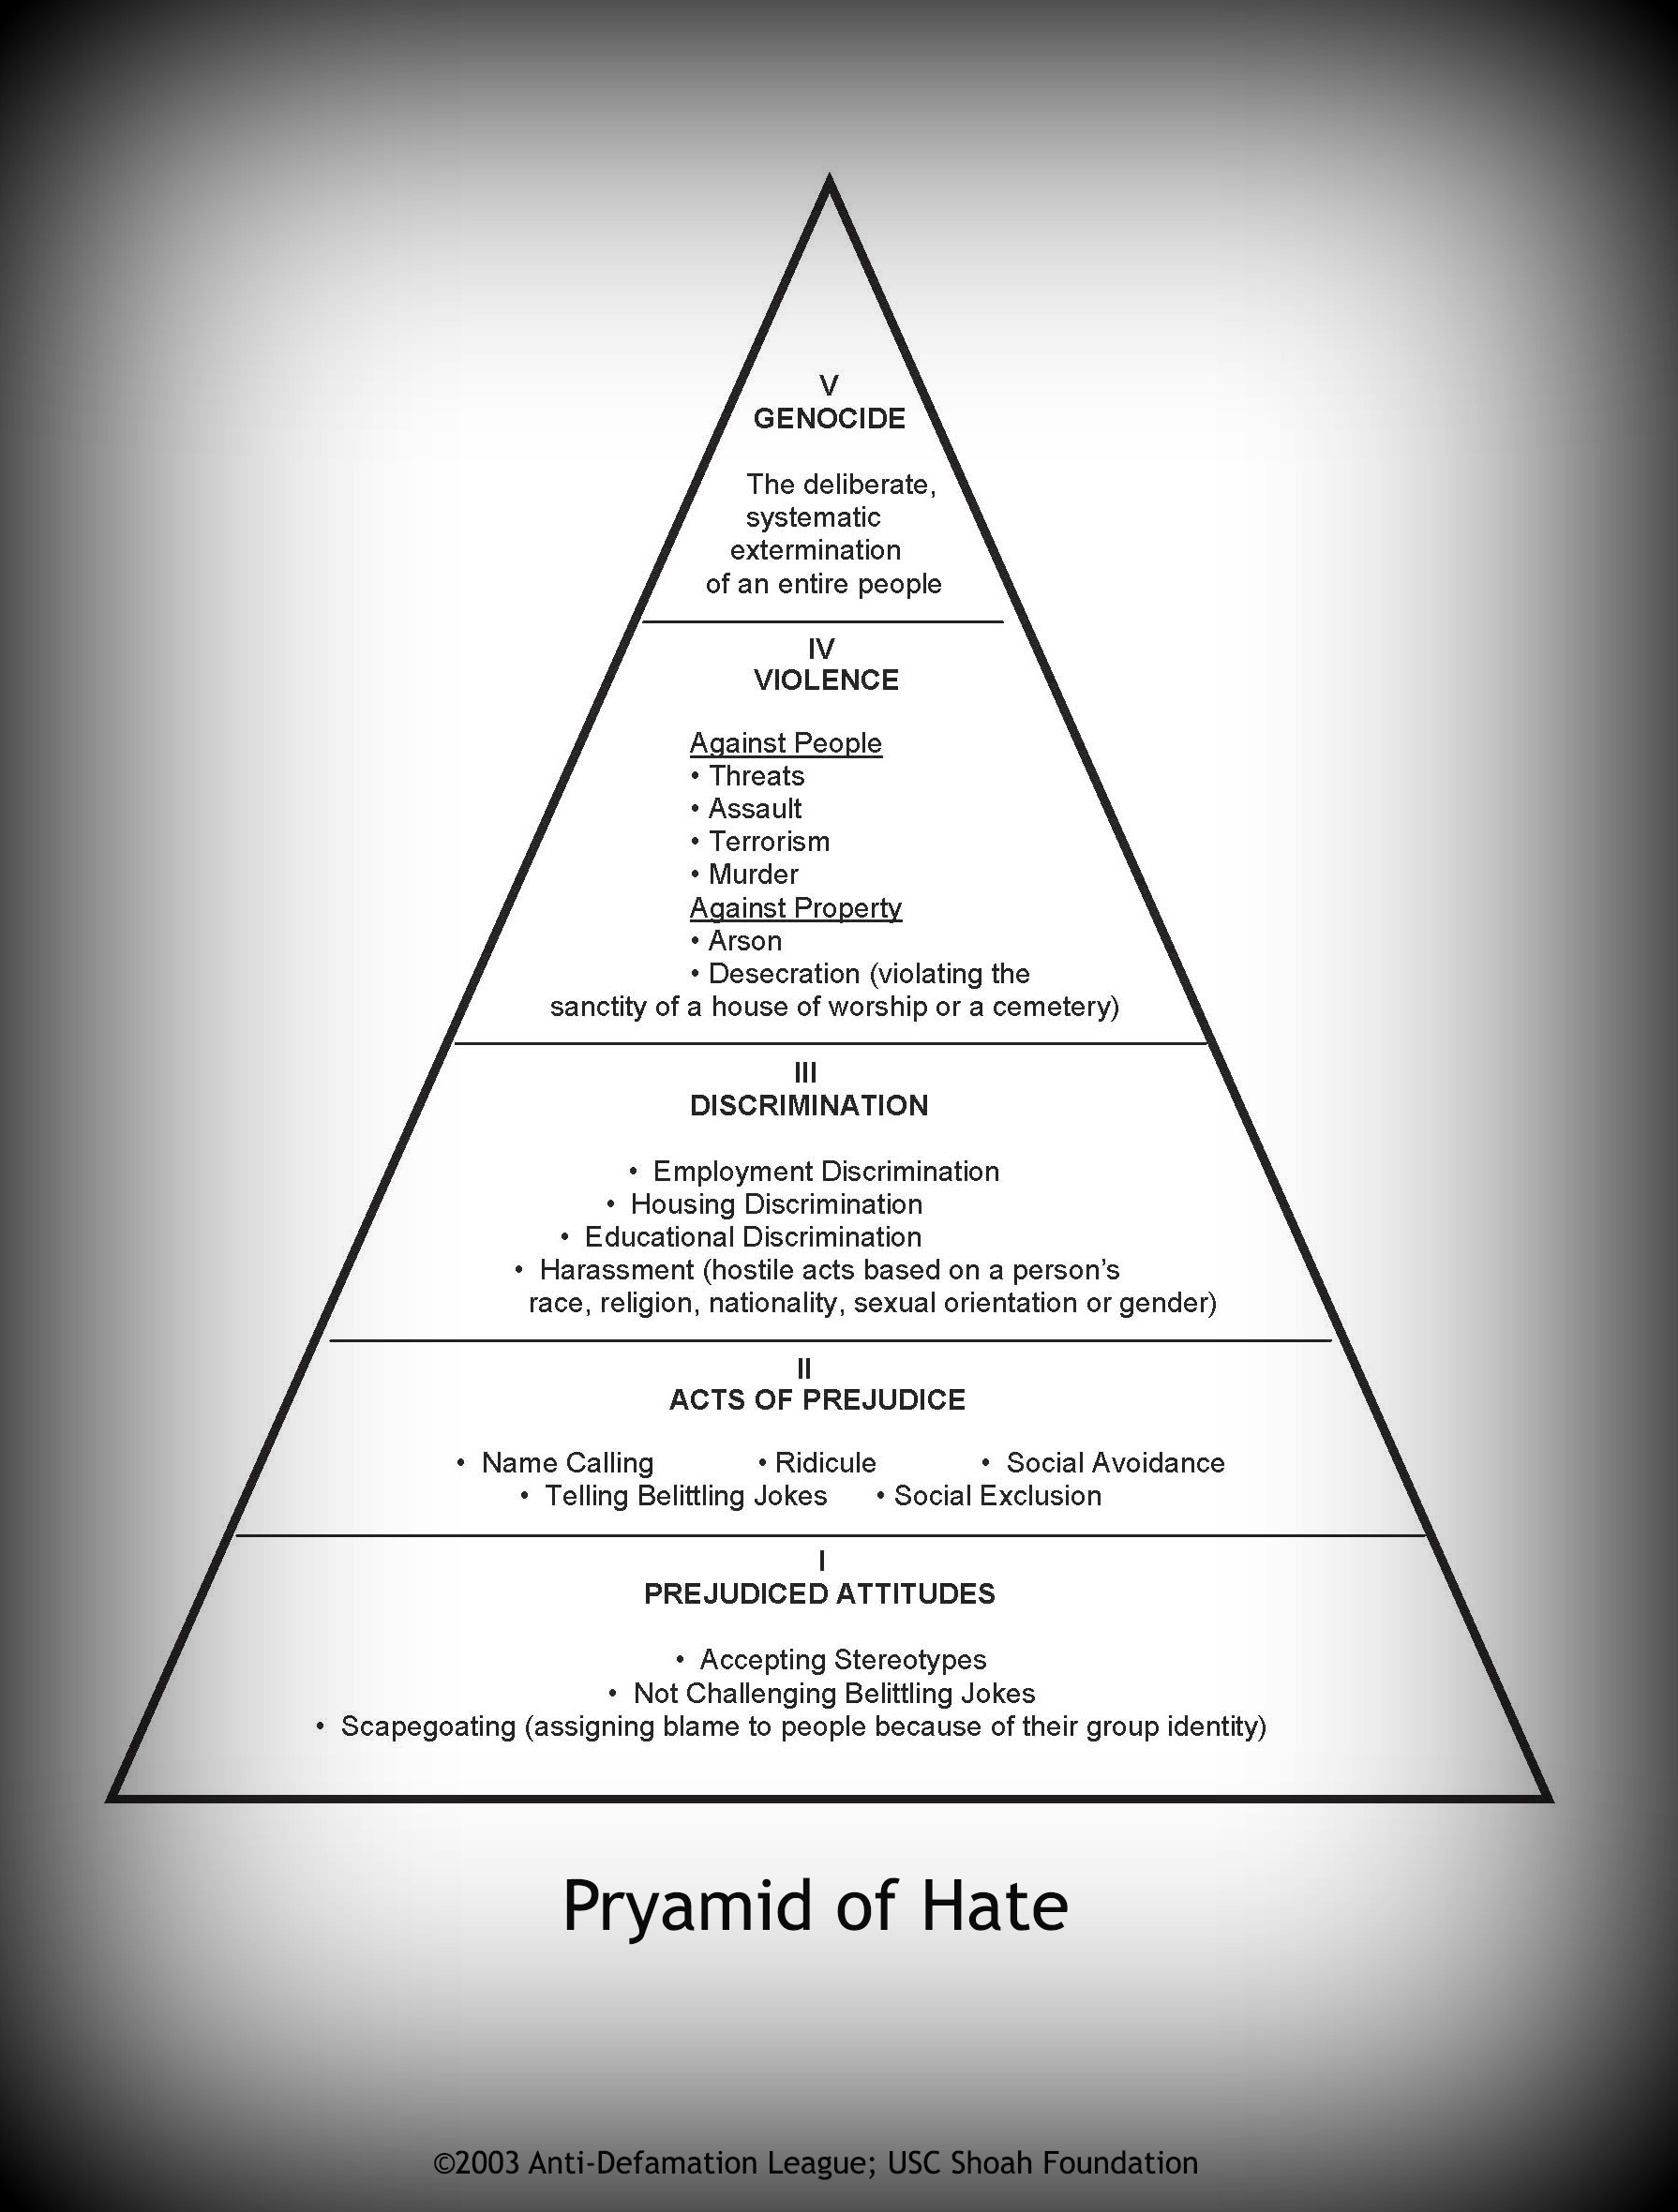  Pyramid of Hate, curricular tool developed by the Anti-Defamation League. 